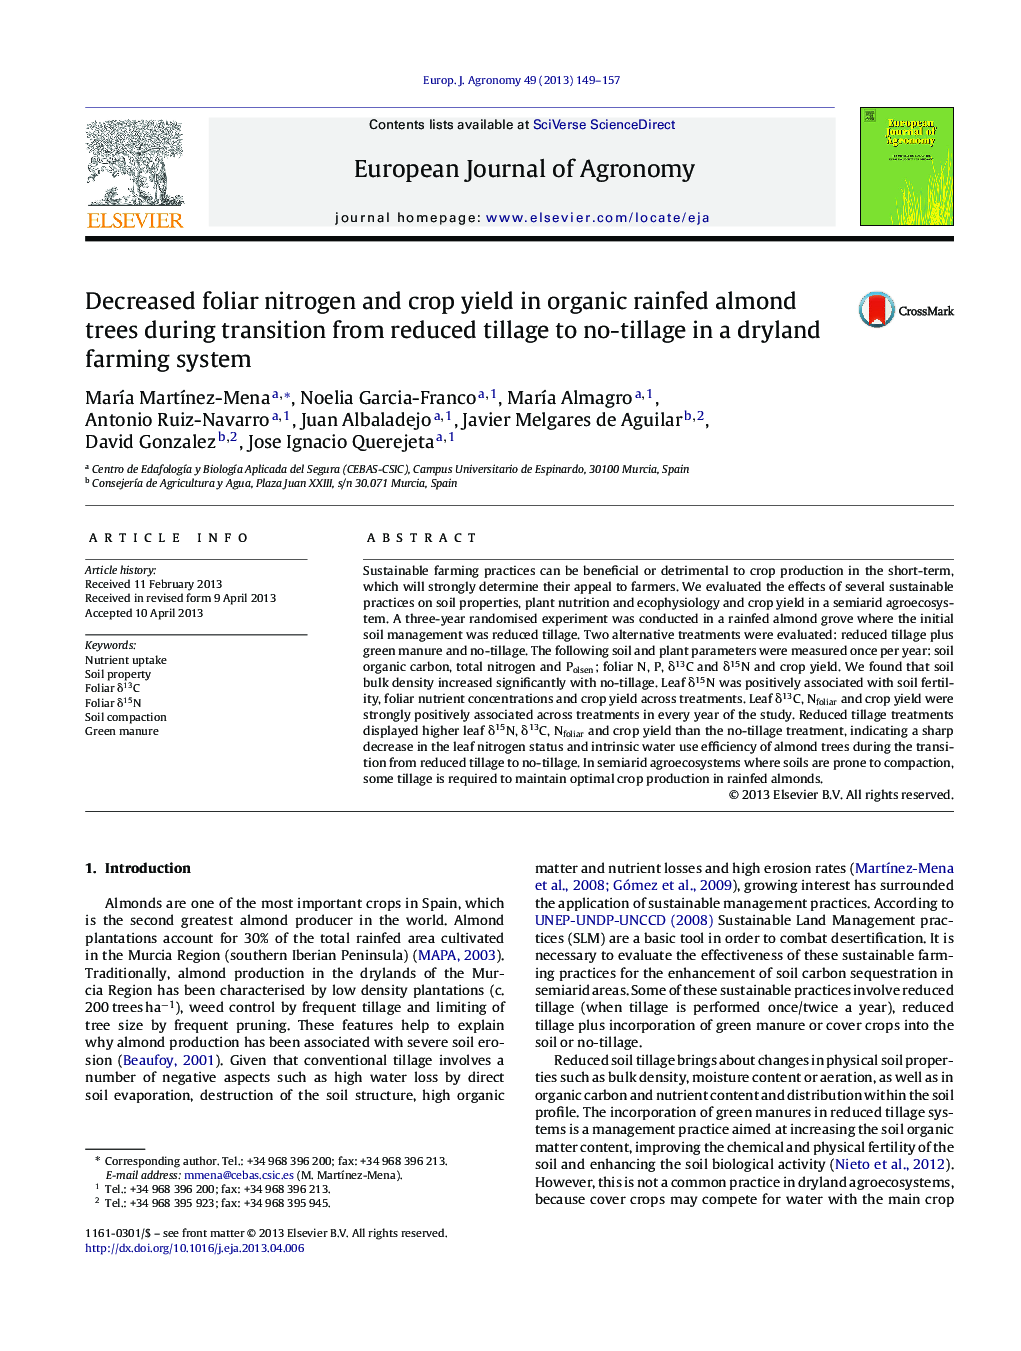 Decreased foliar nitrogen and crop yield in organic rainfed almond trees during transition from reduced tillage to no-tillage in a dryland farming system